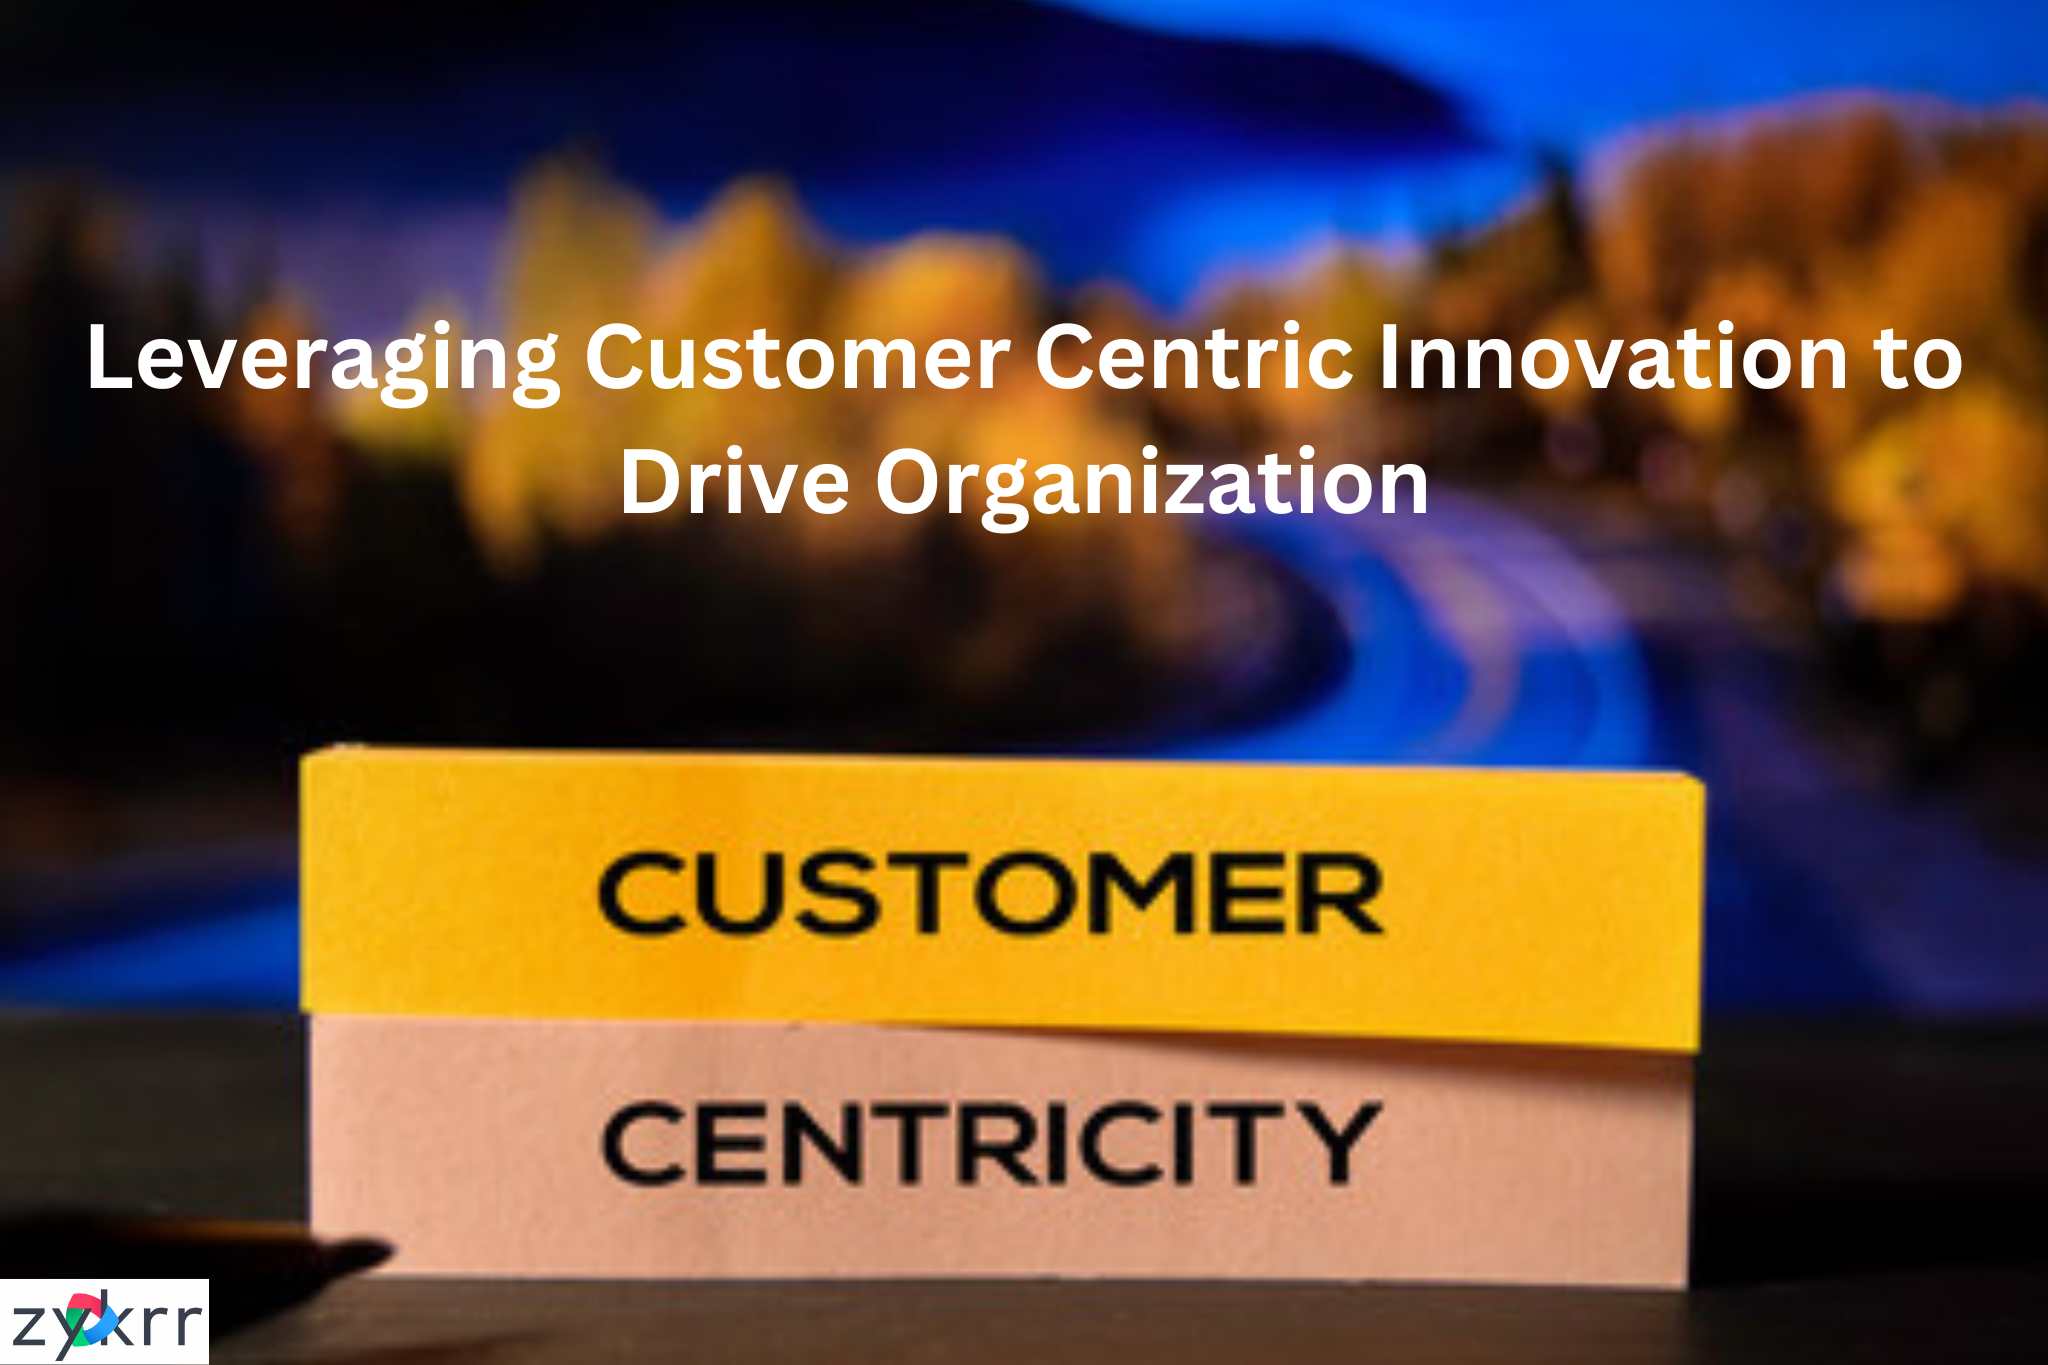 Leveraging Customer Centric Innovation to Drive Organization